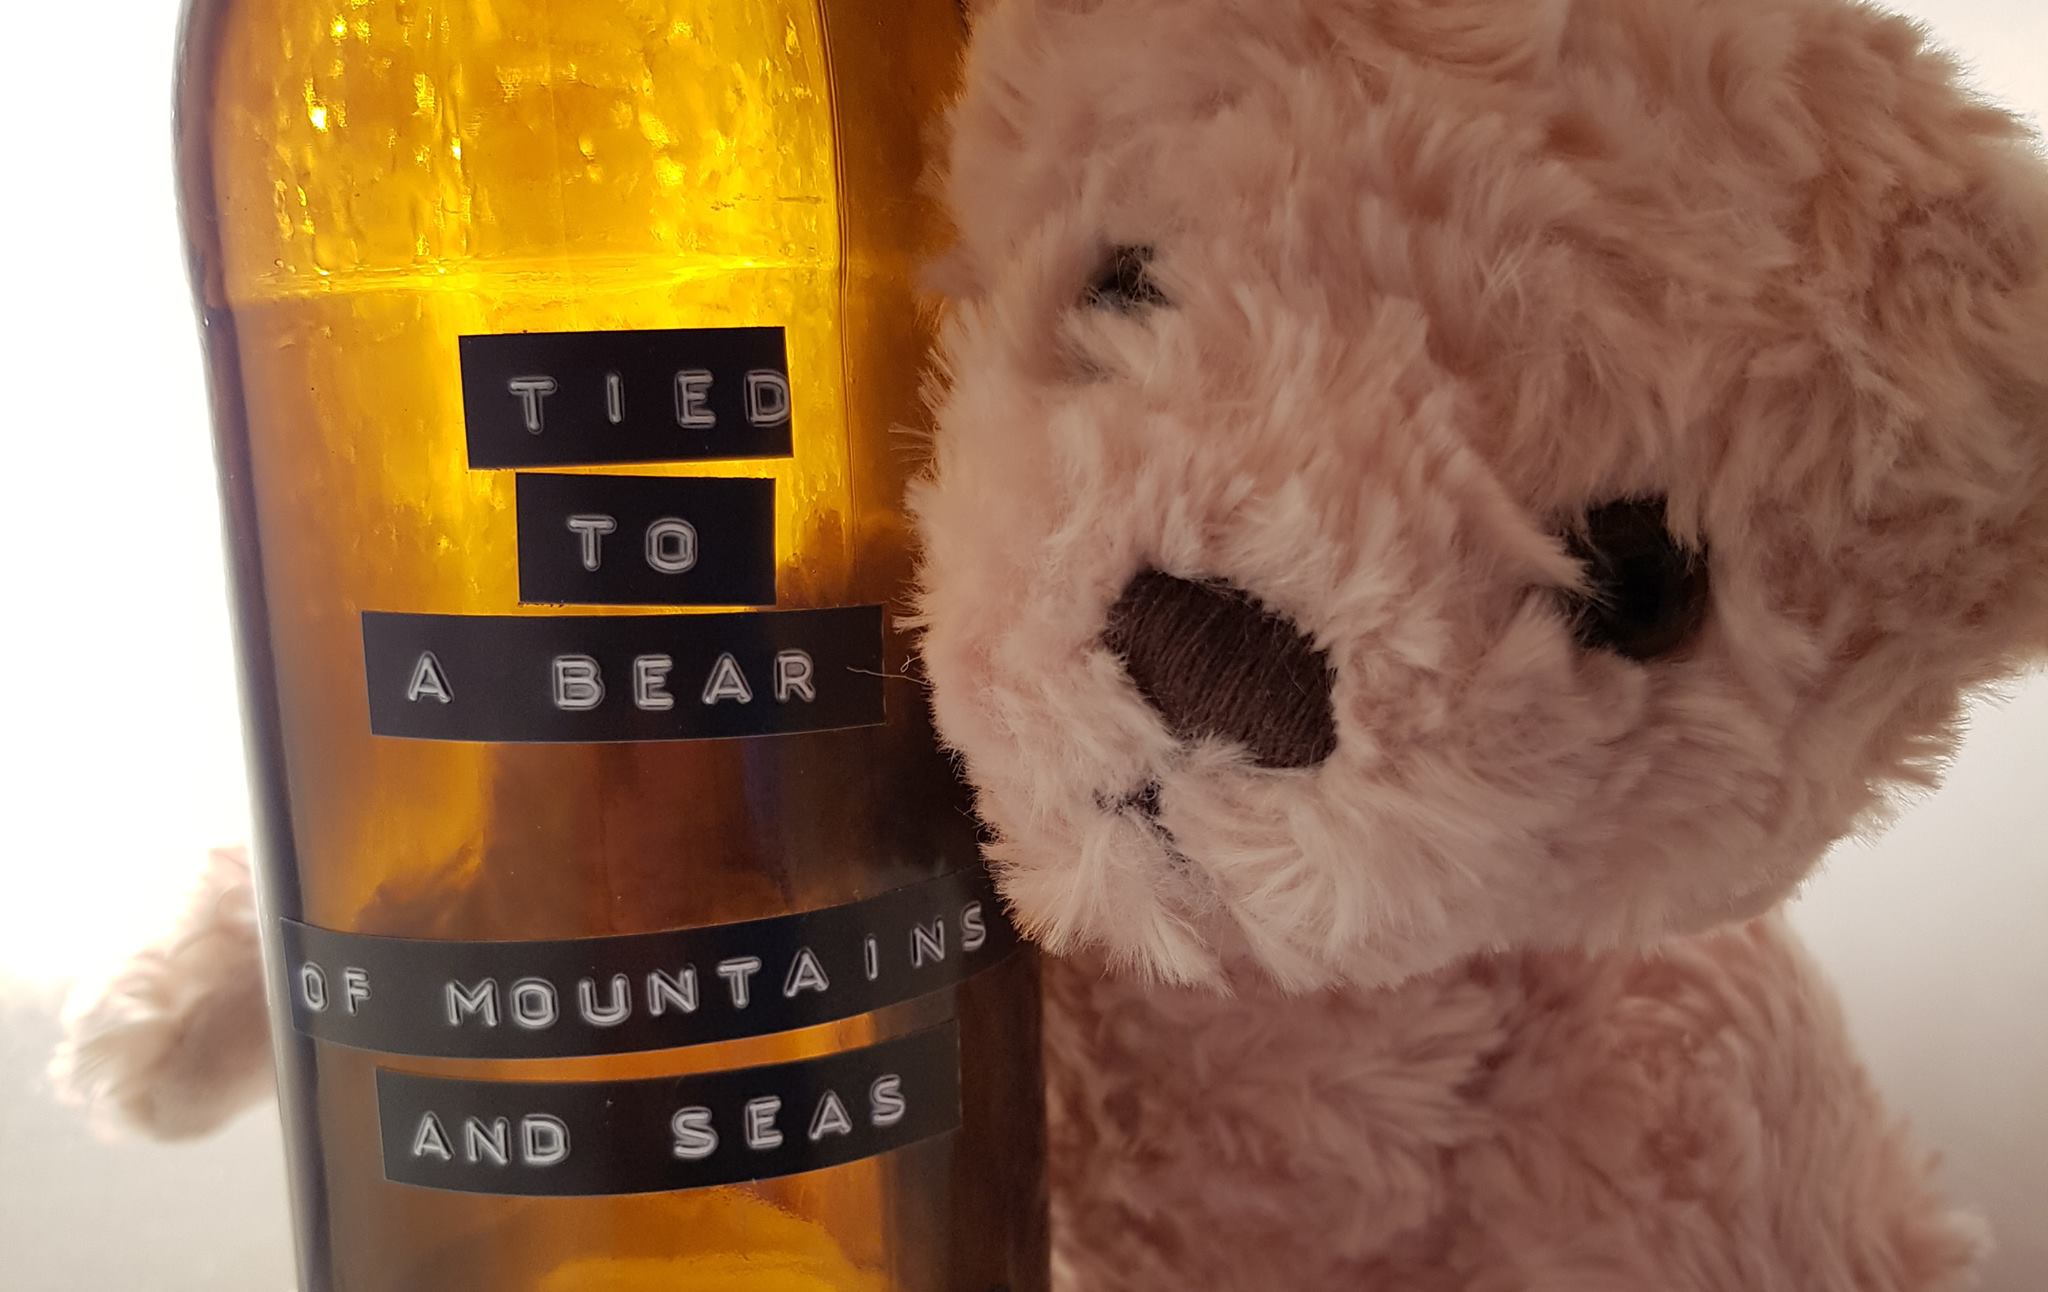 Tied to a Bear + of Mountains and Seas